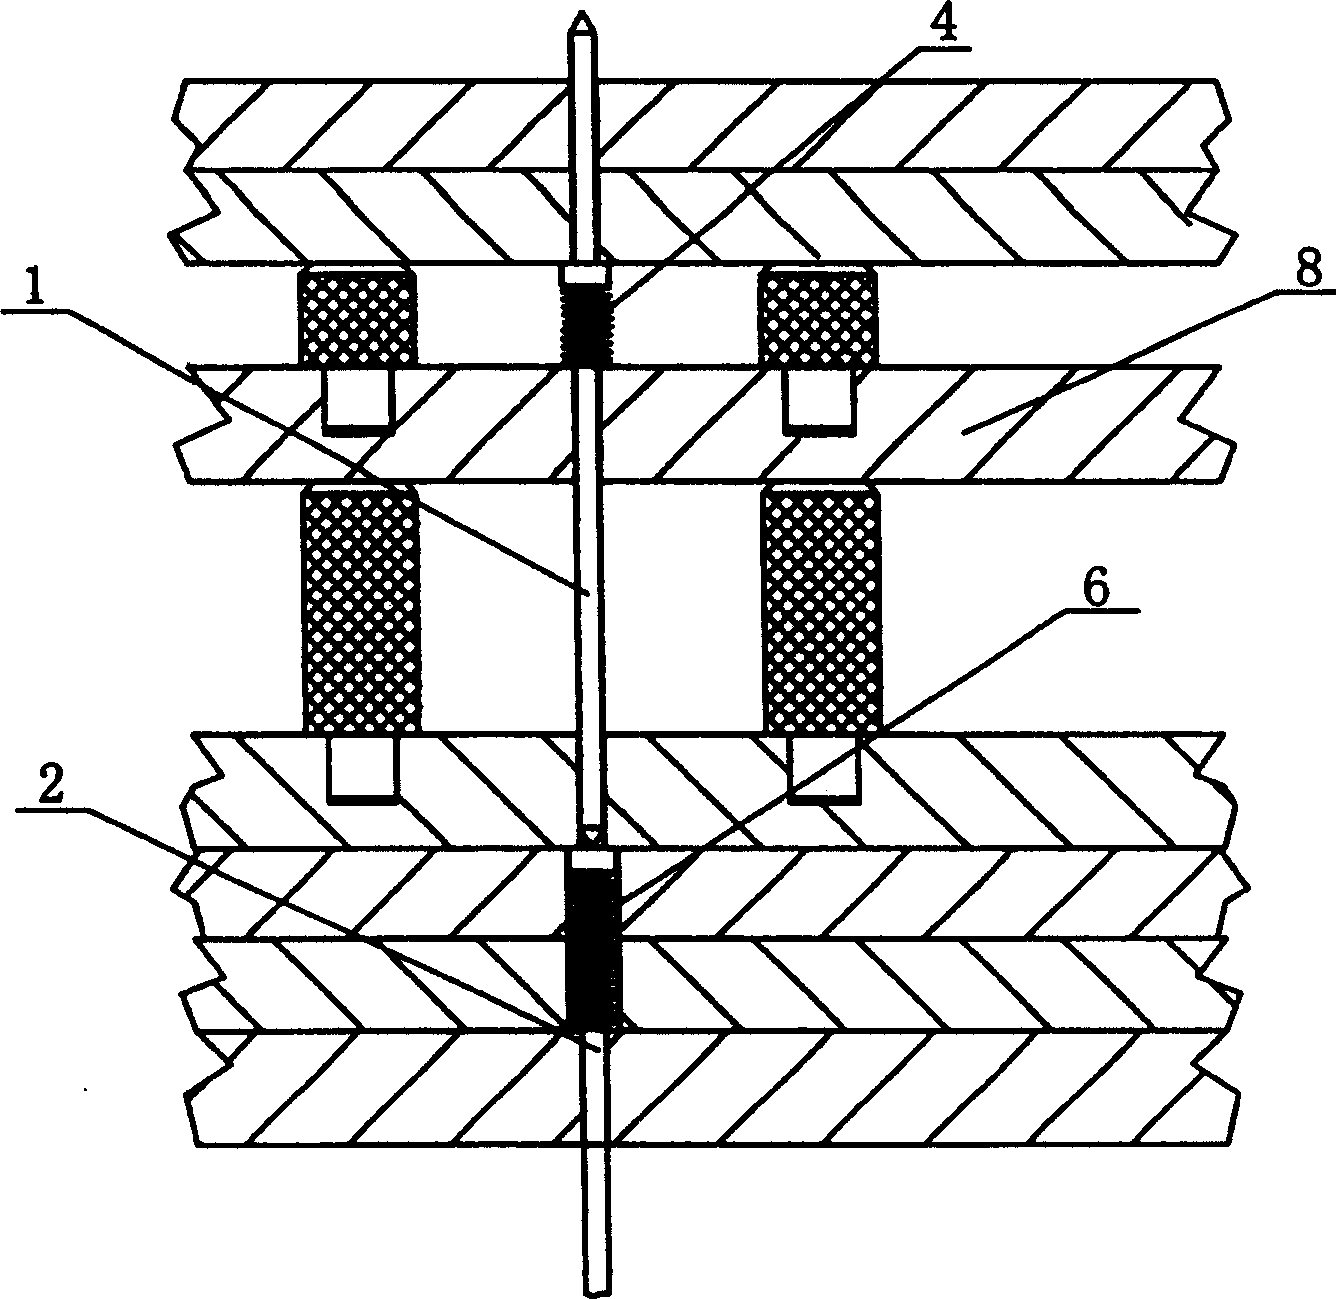 Probe connecting structure for detecting tool of printed circuit board